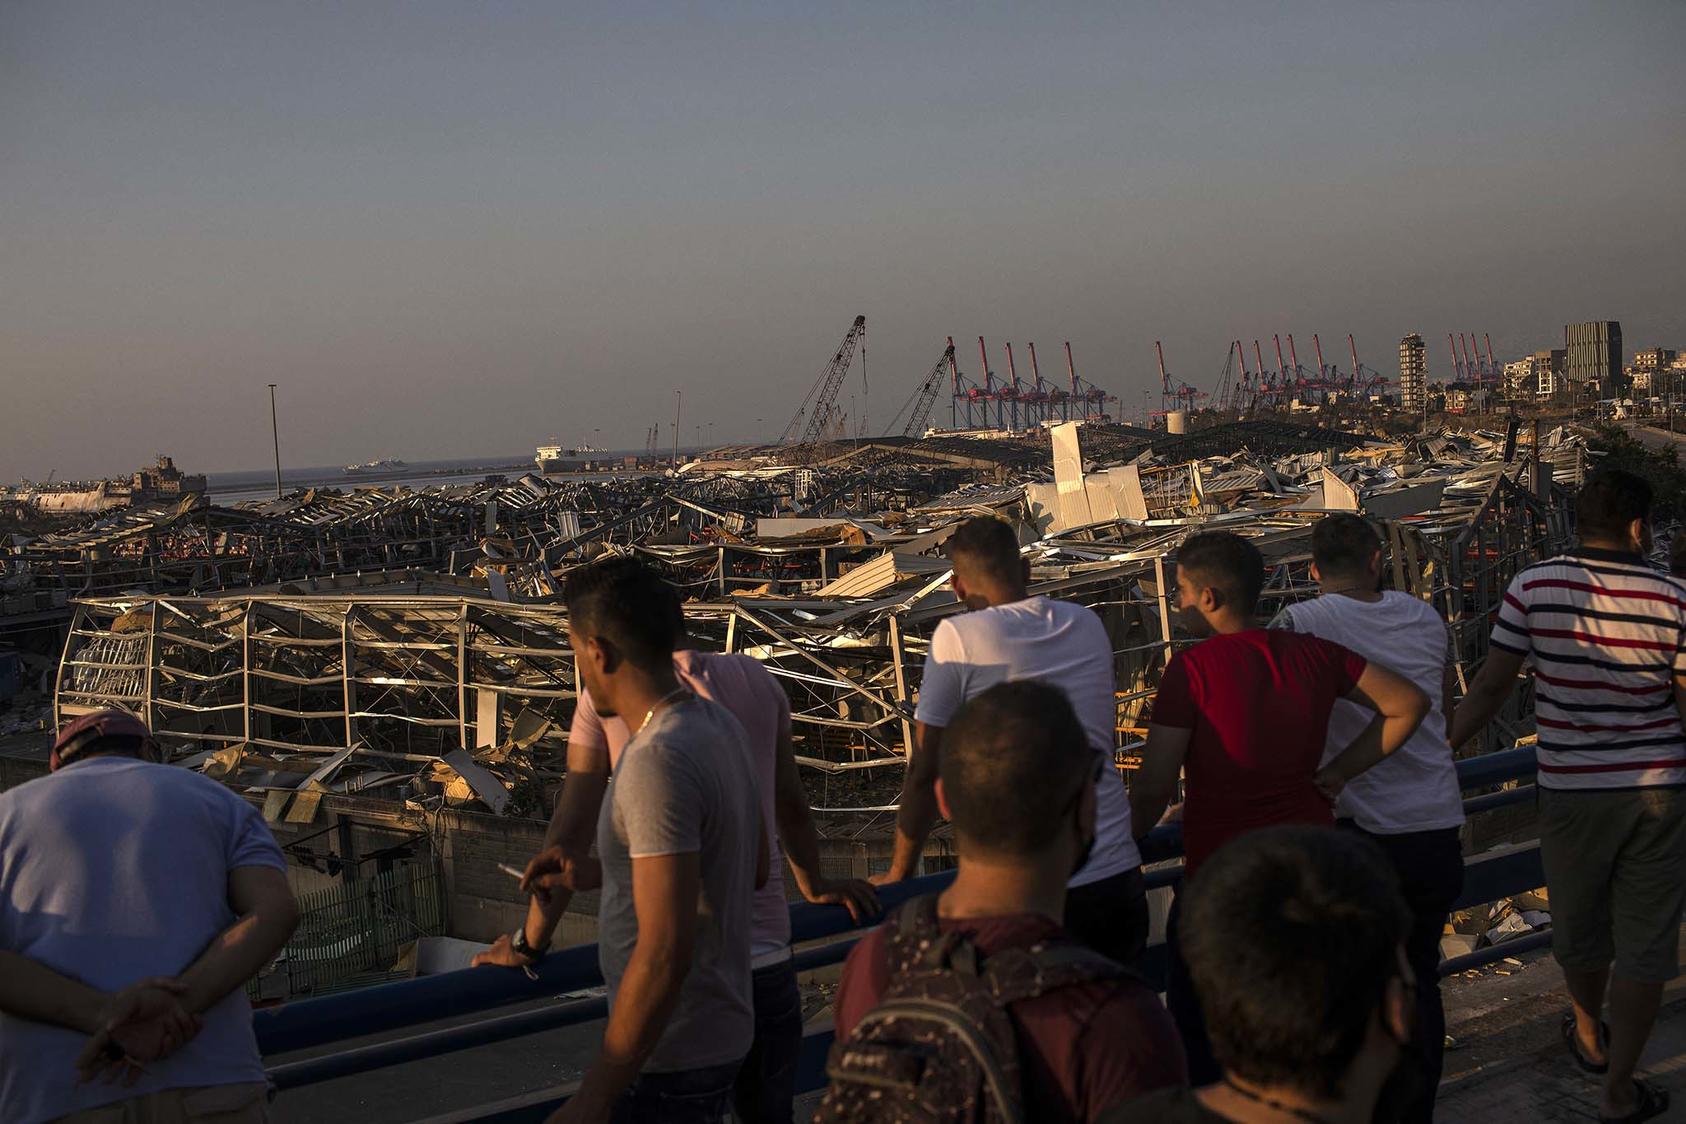 People survey the wreckage at the Beirut port, Aug. 6, 2020. In February, a court in Lebanon removed the judge investigating the explosion, adding a delay to the country’s sluggish efforts to determine what happened and ensure accountability. (Diego Ibarra Sanchez/The New York Times)